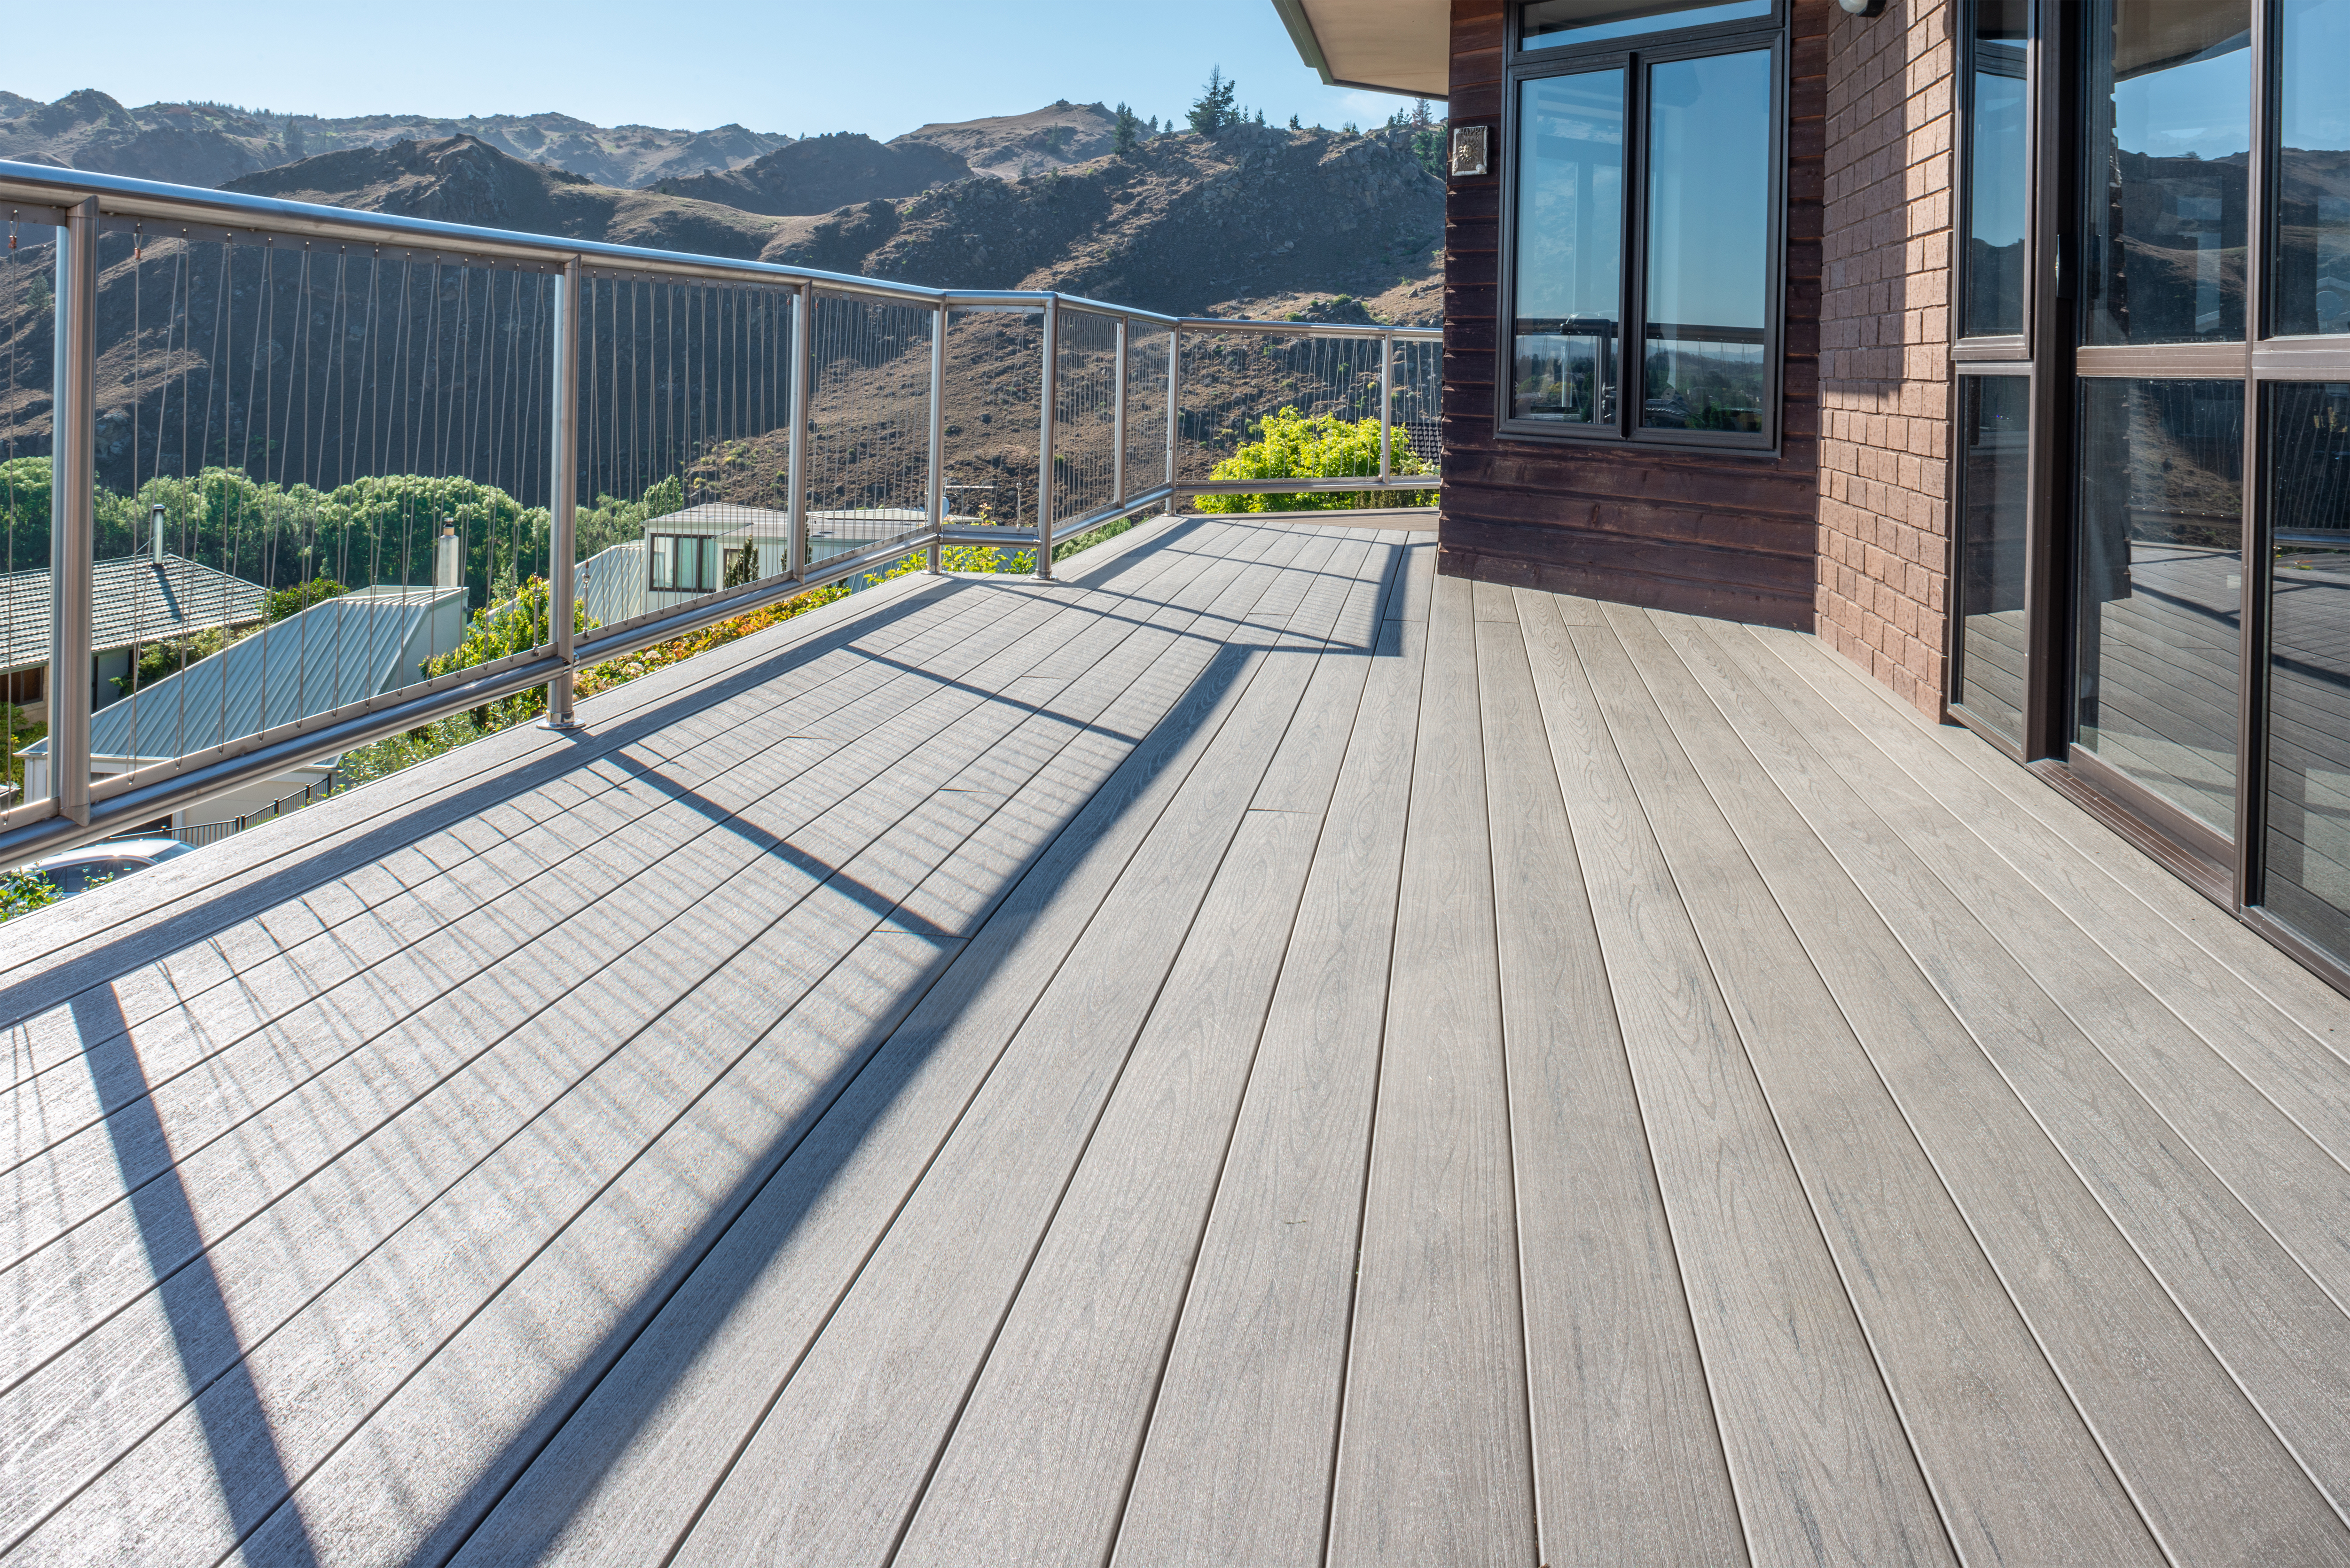 TimberTech Composite and Advanced PVC Decking